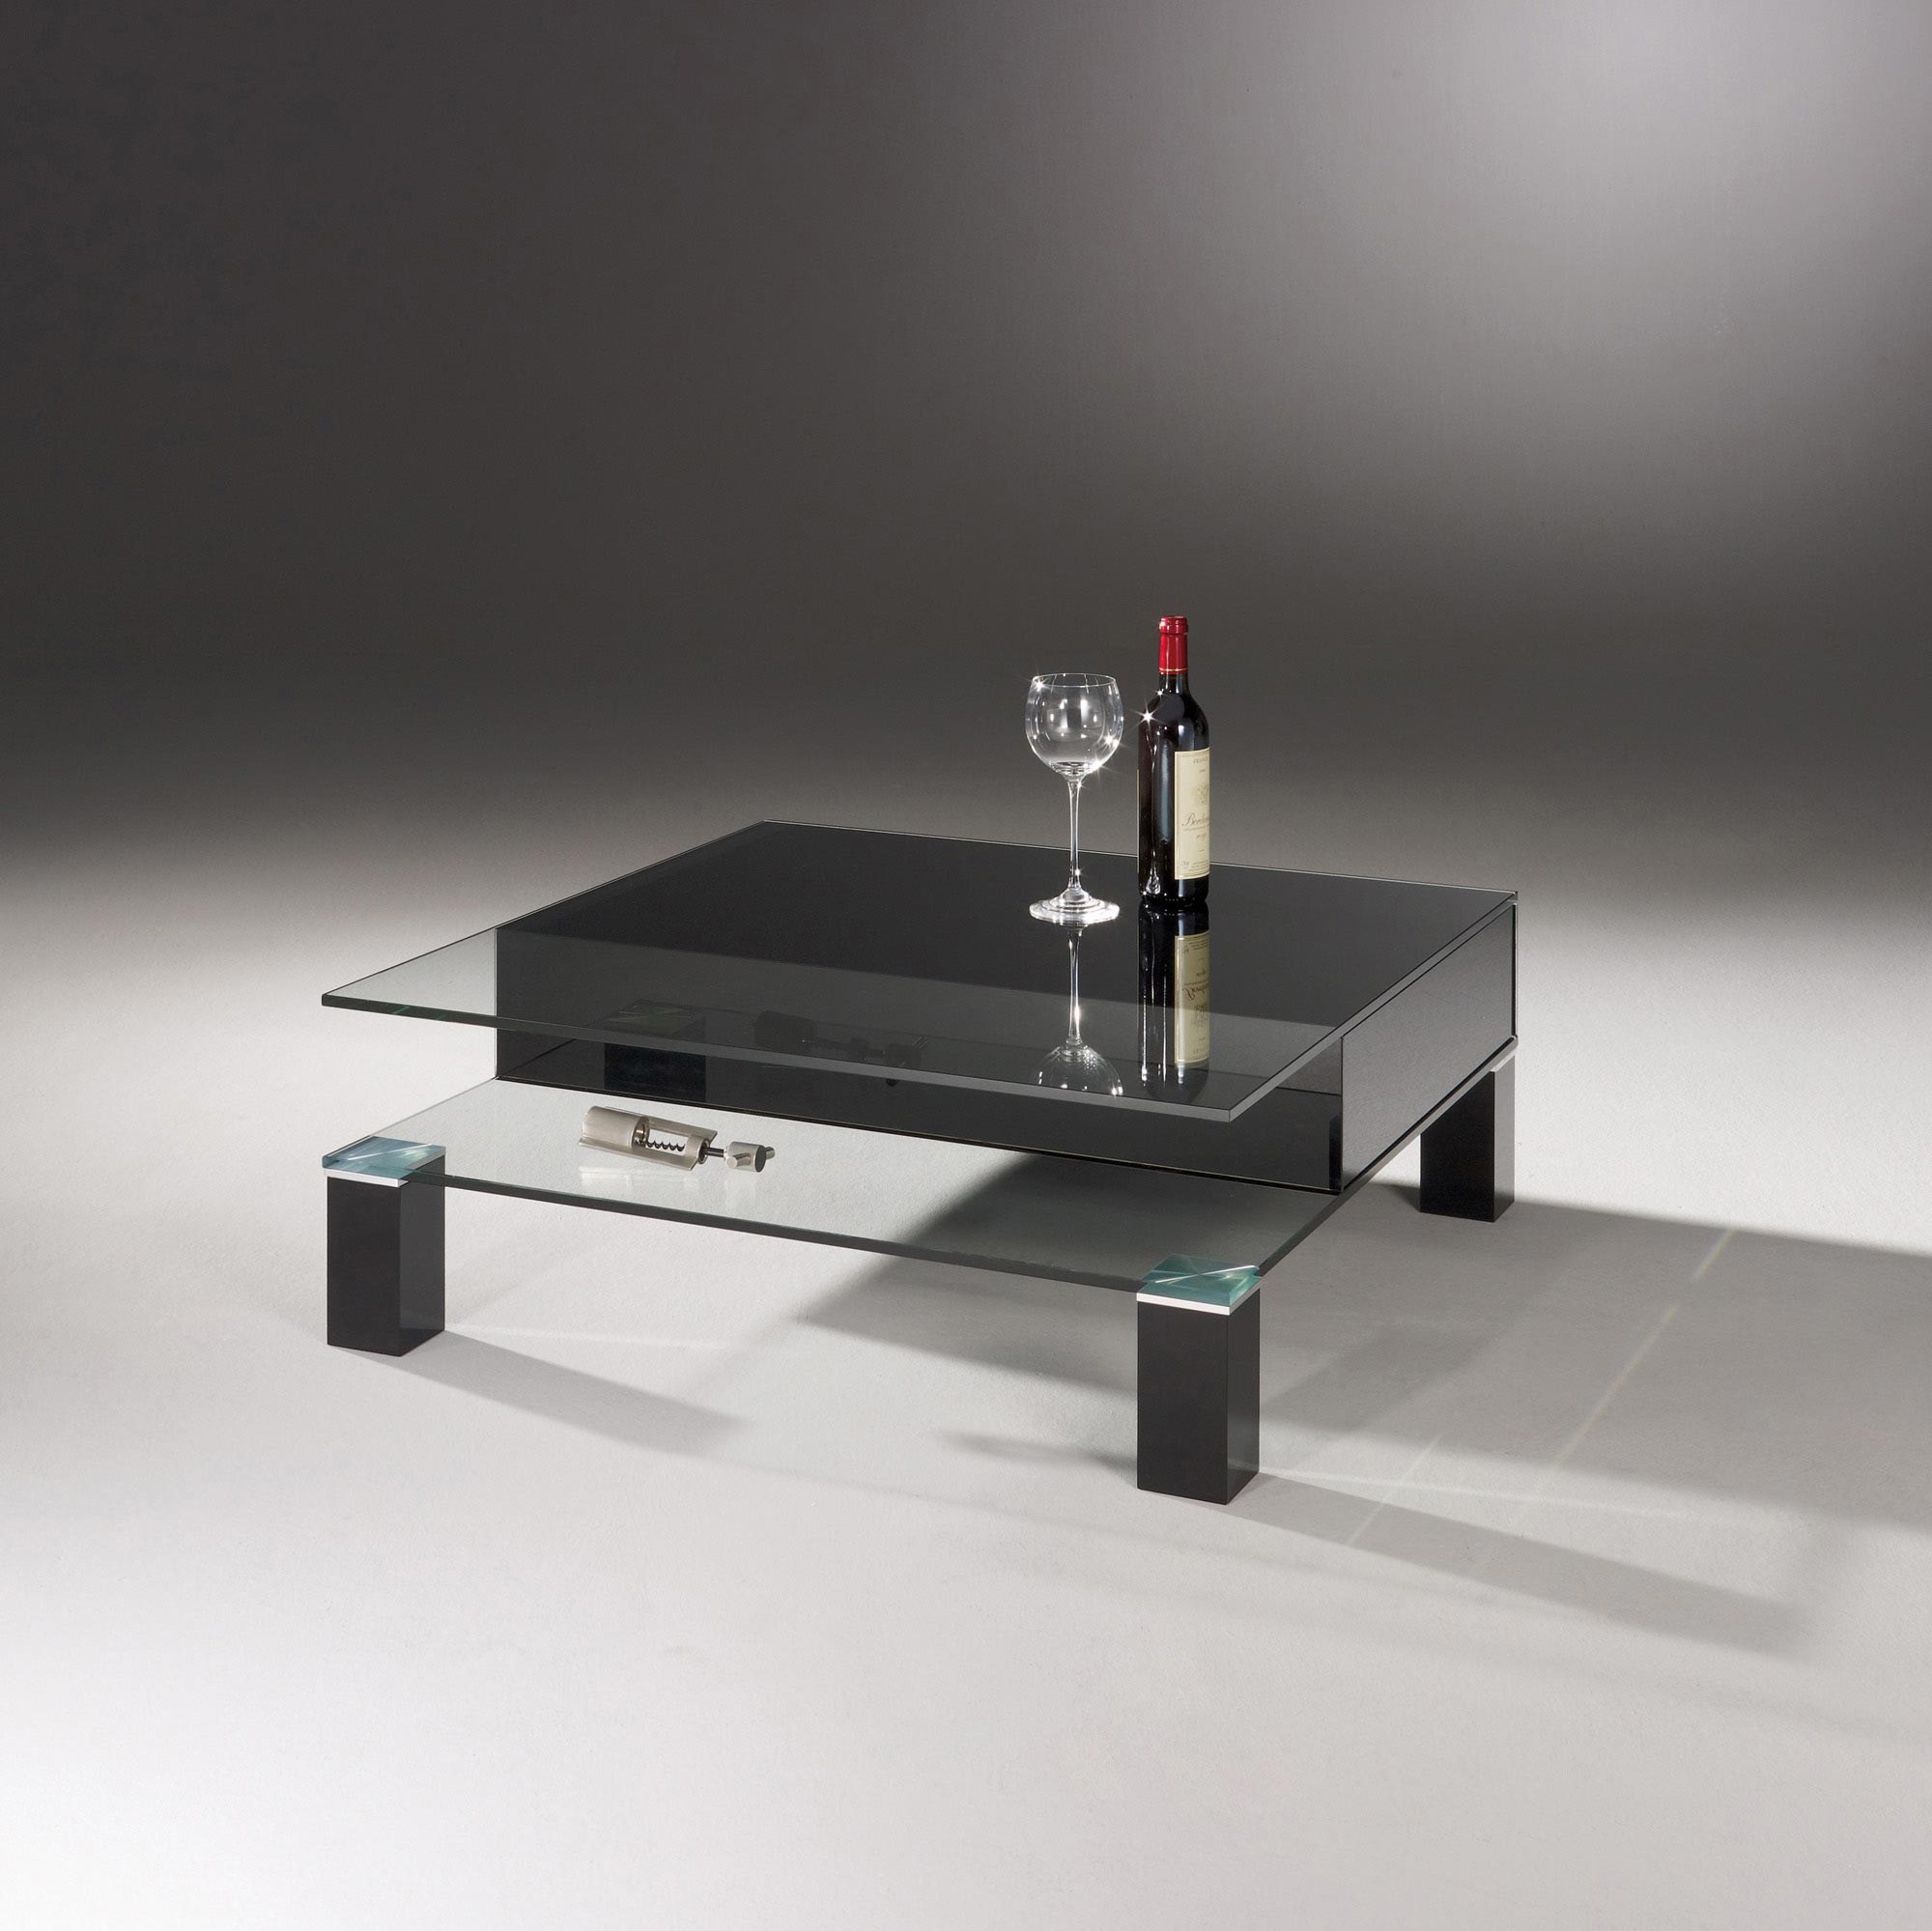 Glass cocktail table THEBEN by DREIECK DESIGN: THEBEN 99/2 (with two drawers) - FLOATGLASS partial color jet black